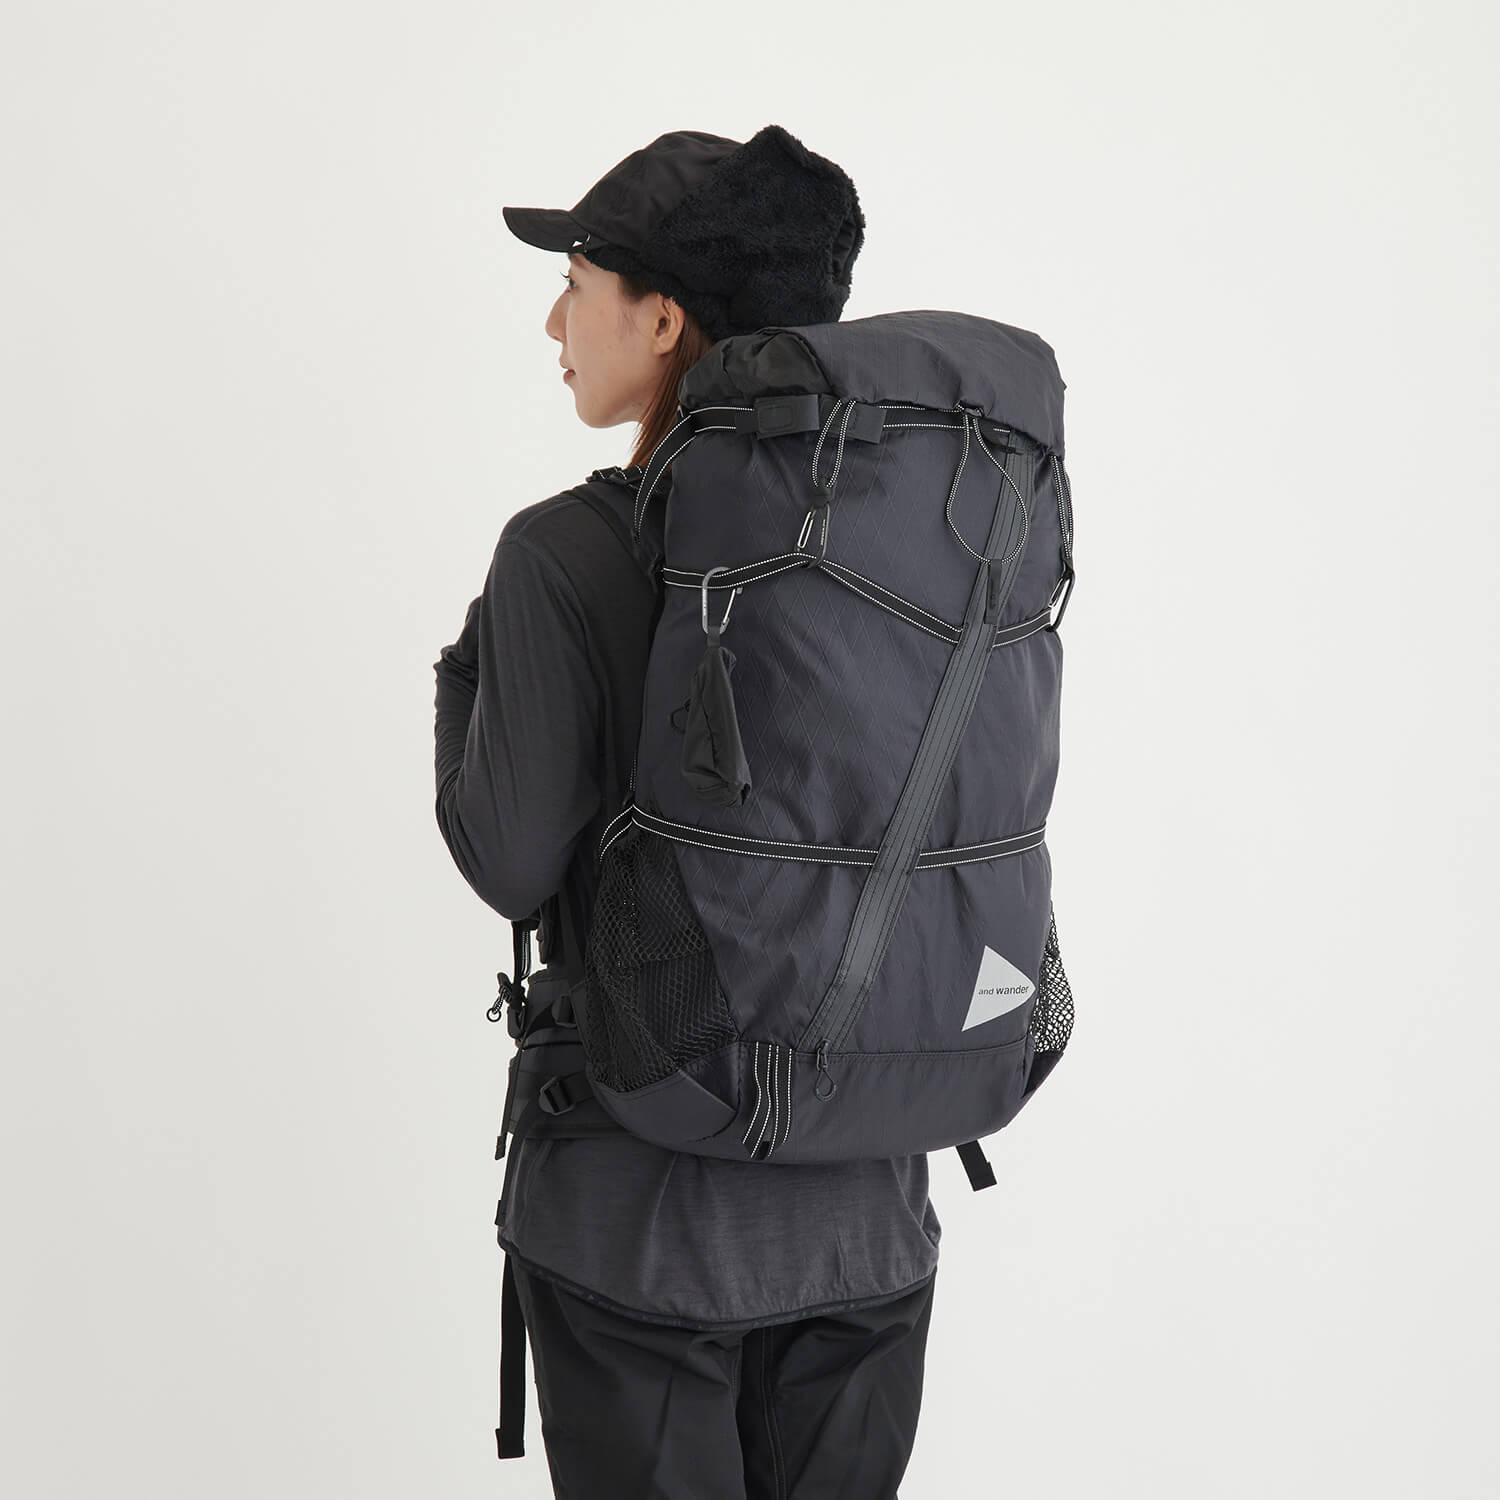 and wander 40L バックパック